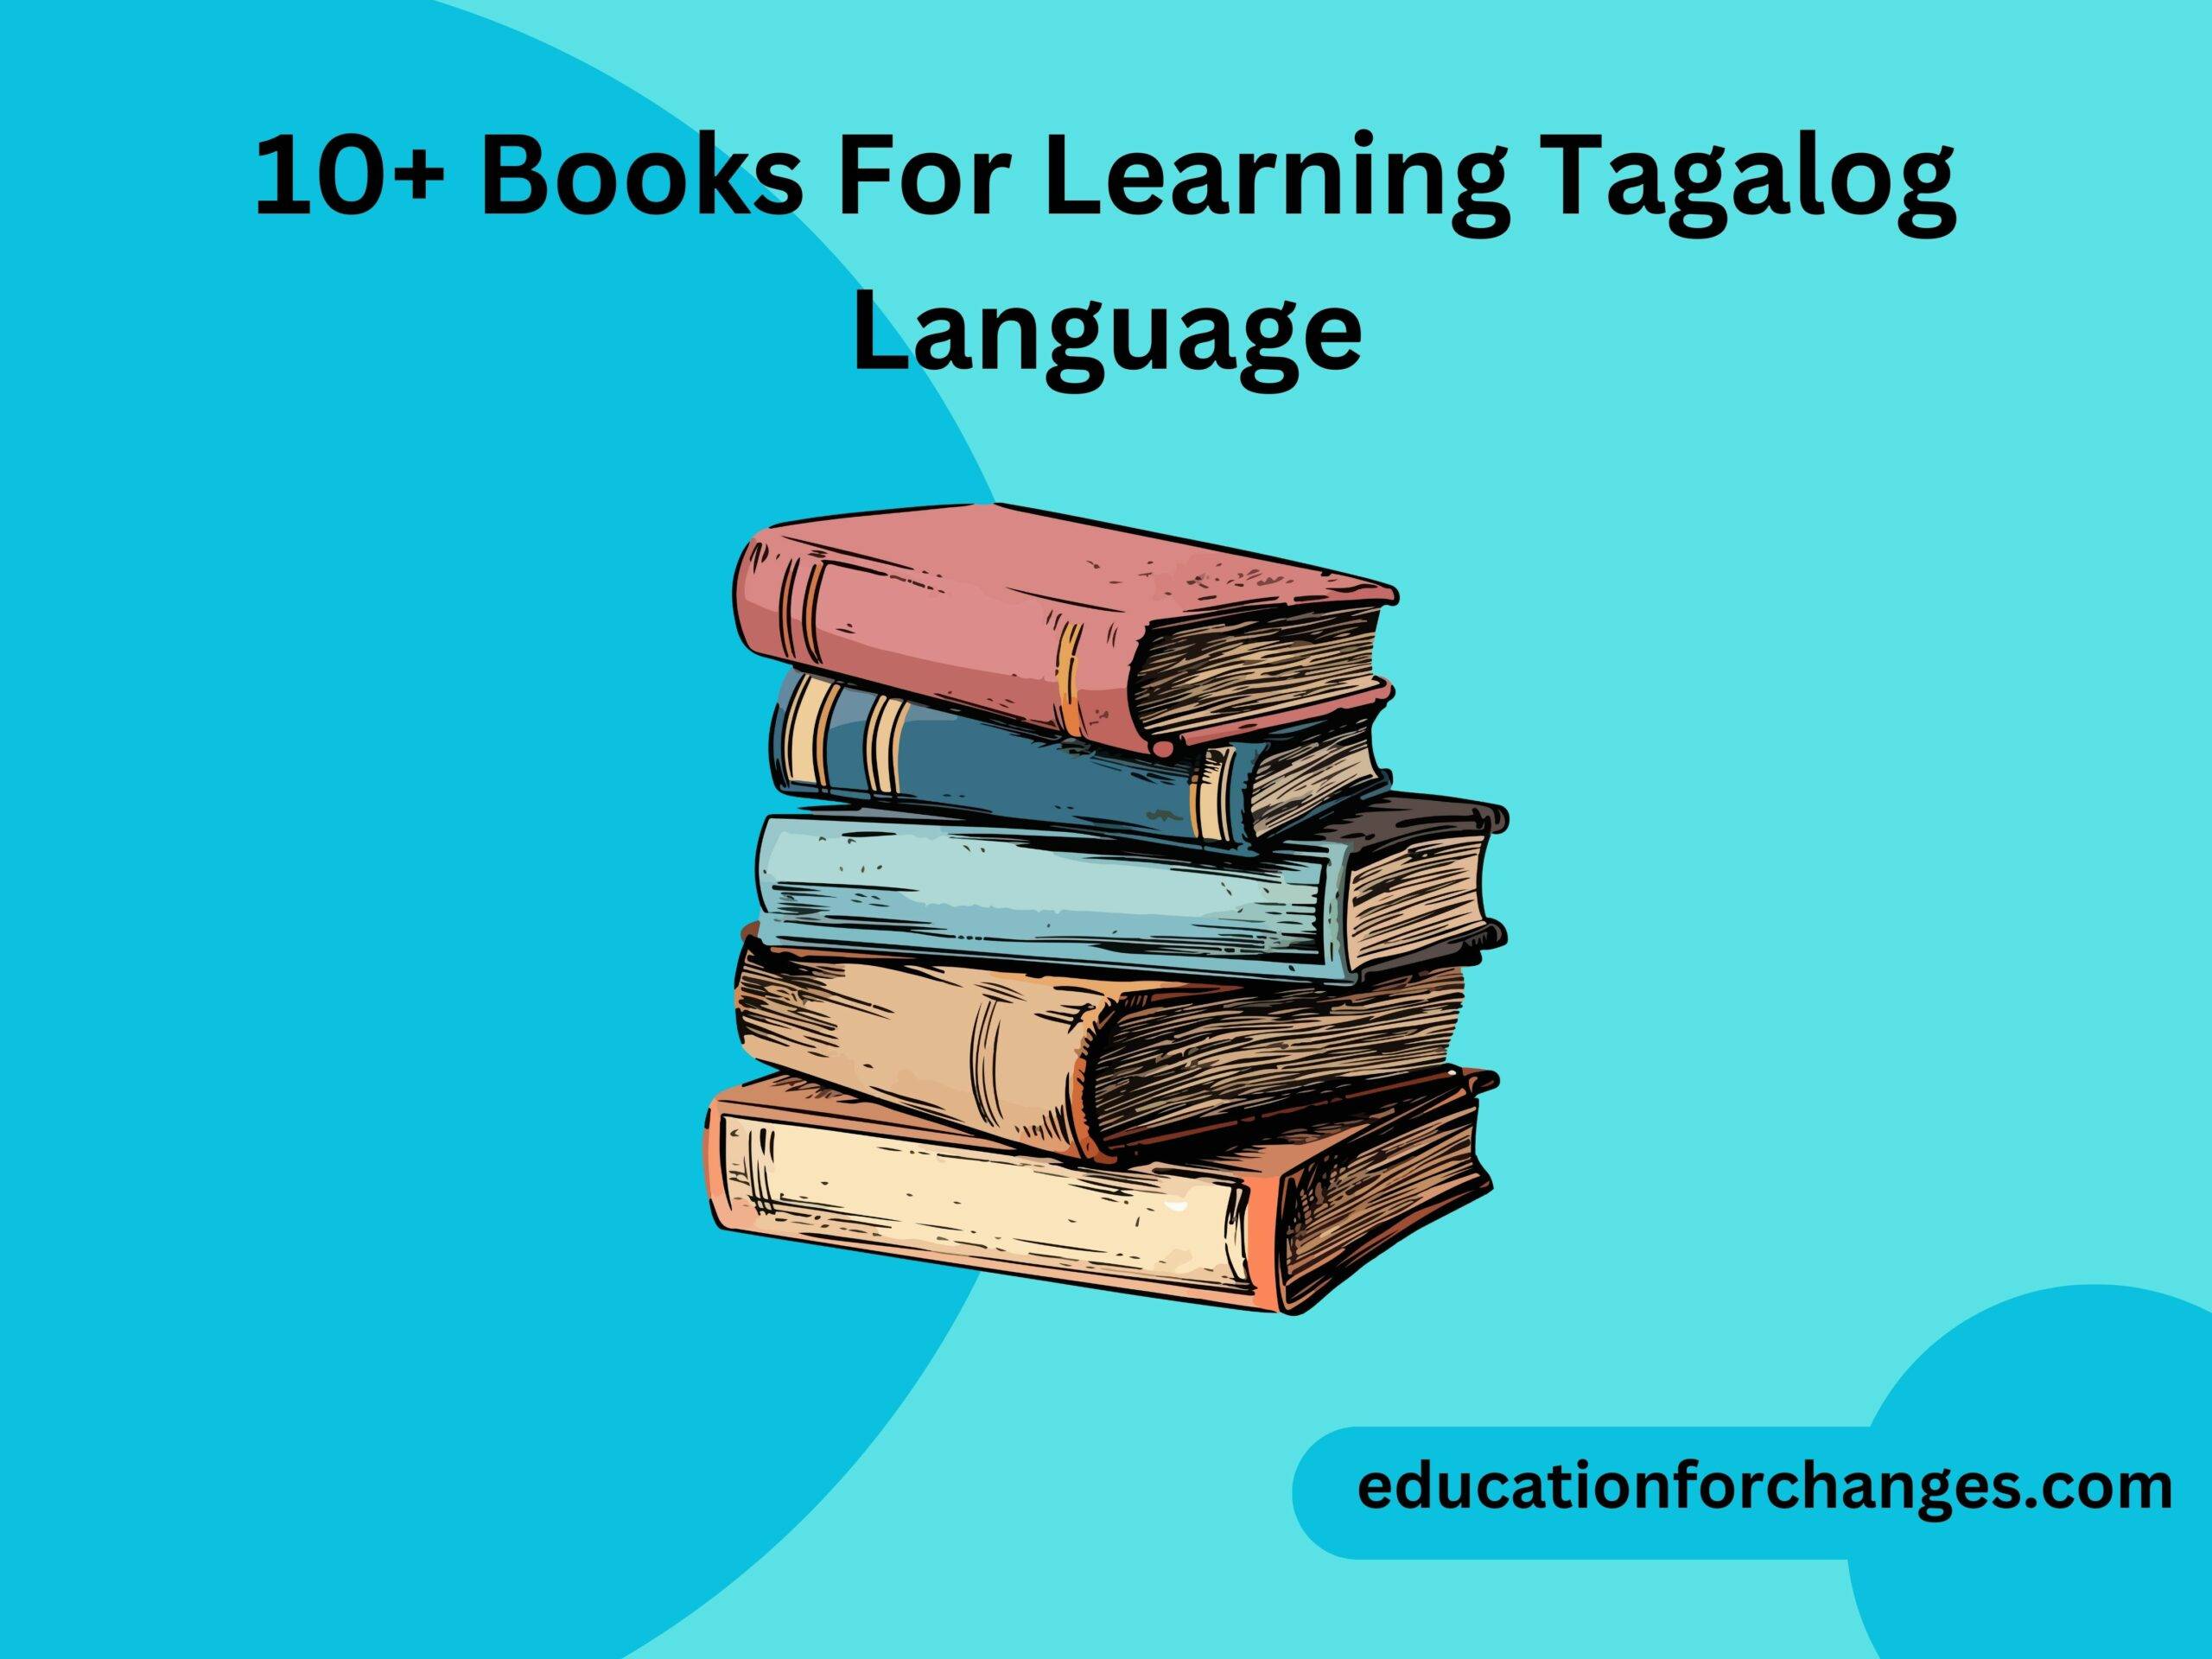 10+ Books For Learning Tagalog Language